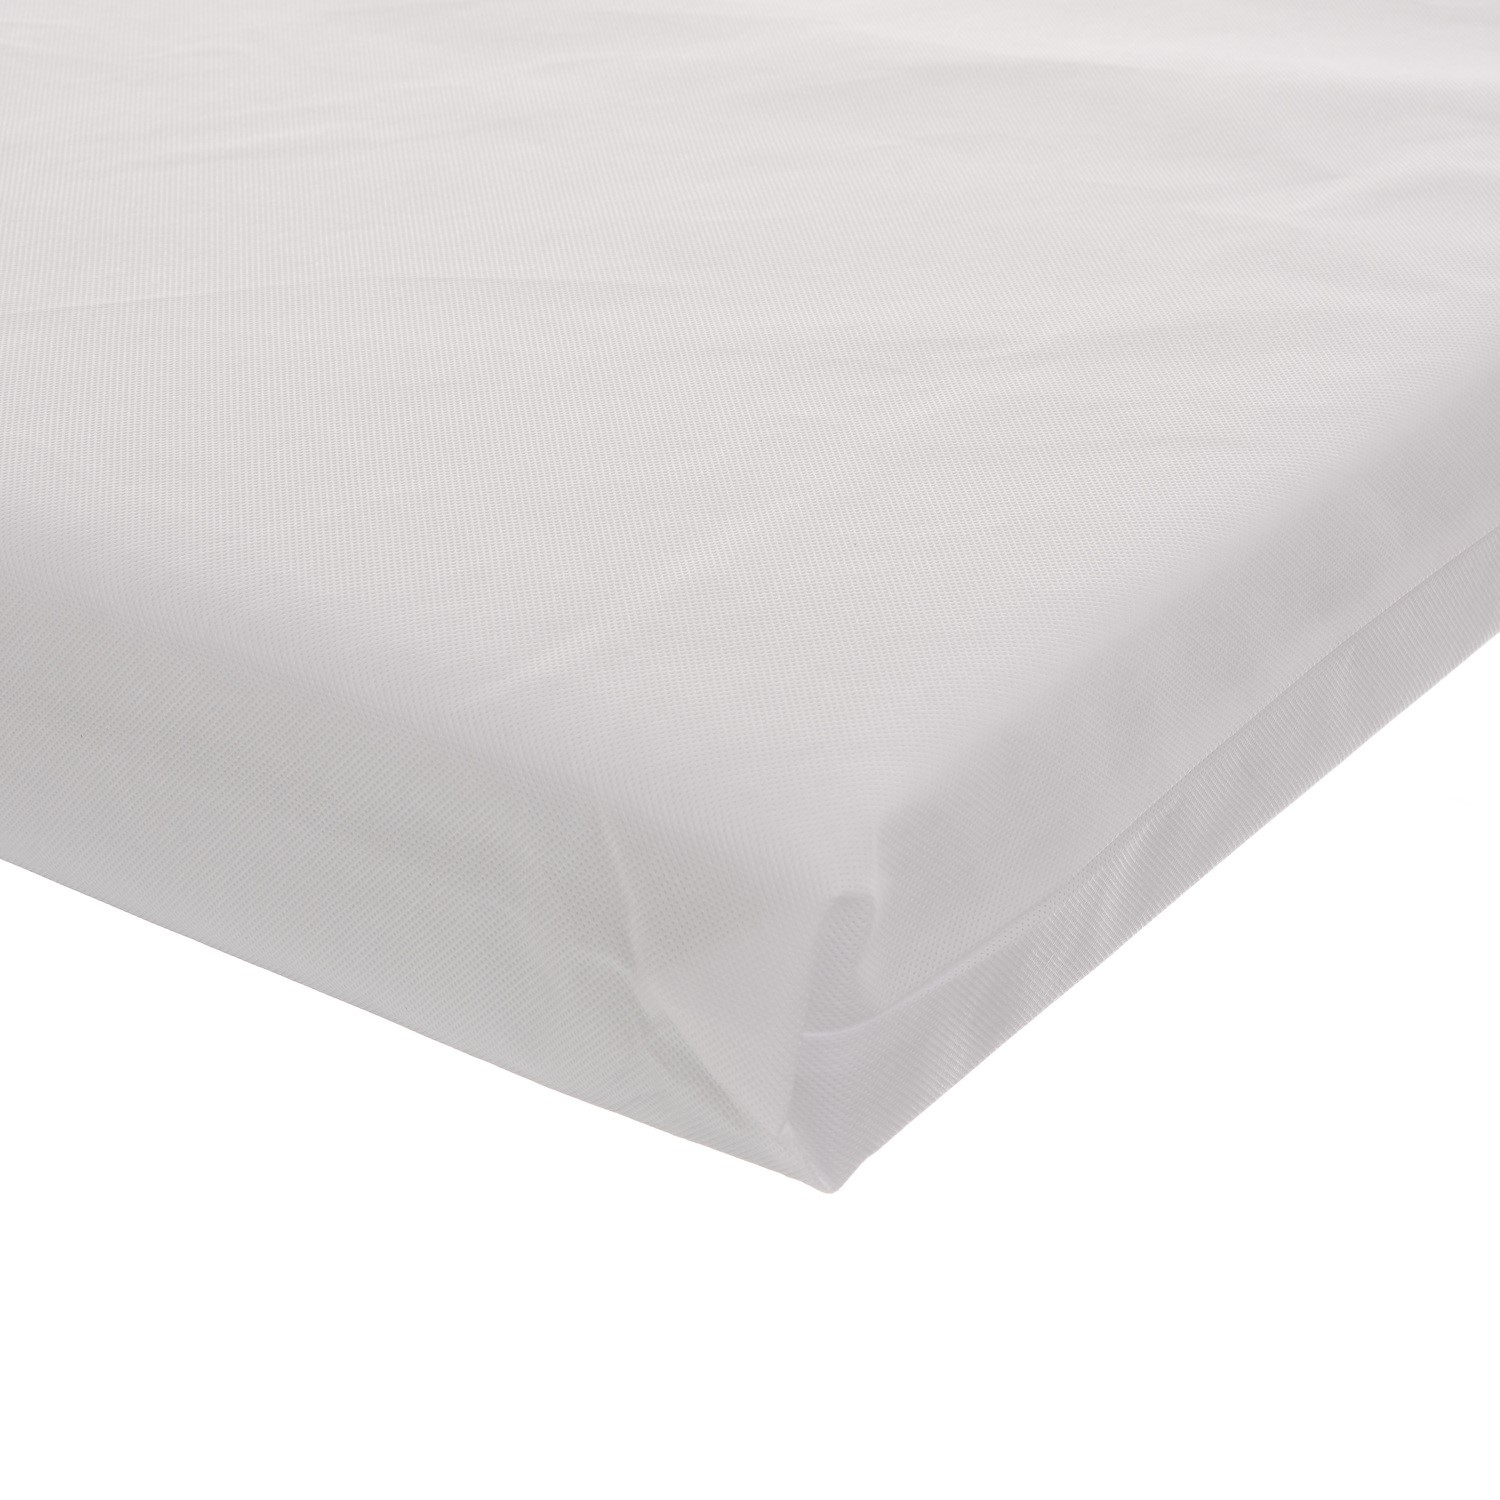 Photo of Hypoallergenic breathable fibre cot bed mattress -140cm x 70cm - obaby